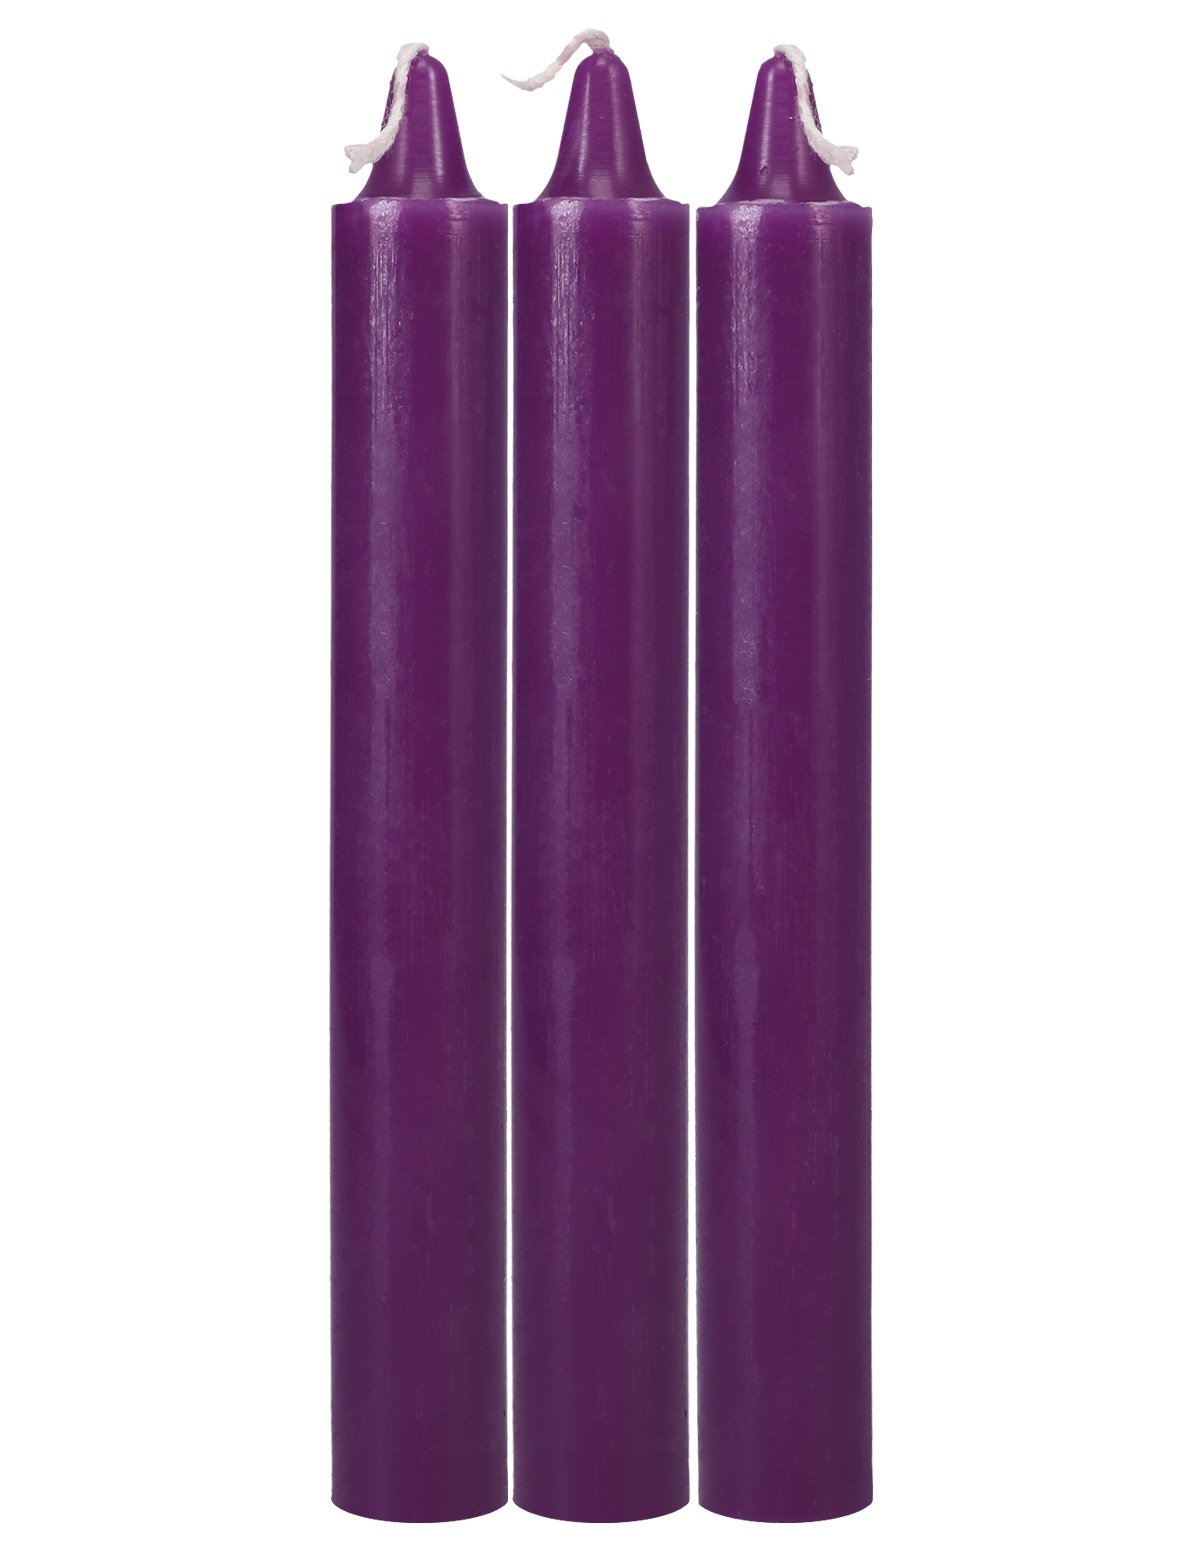 alternate image for Japanese Drip Purple Candles 3 Pack - Hot Wax Play